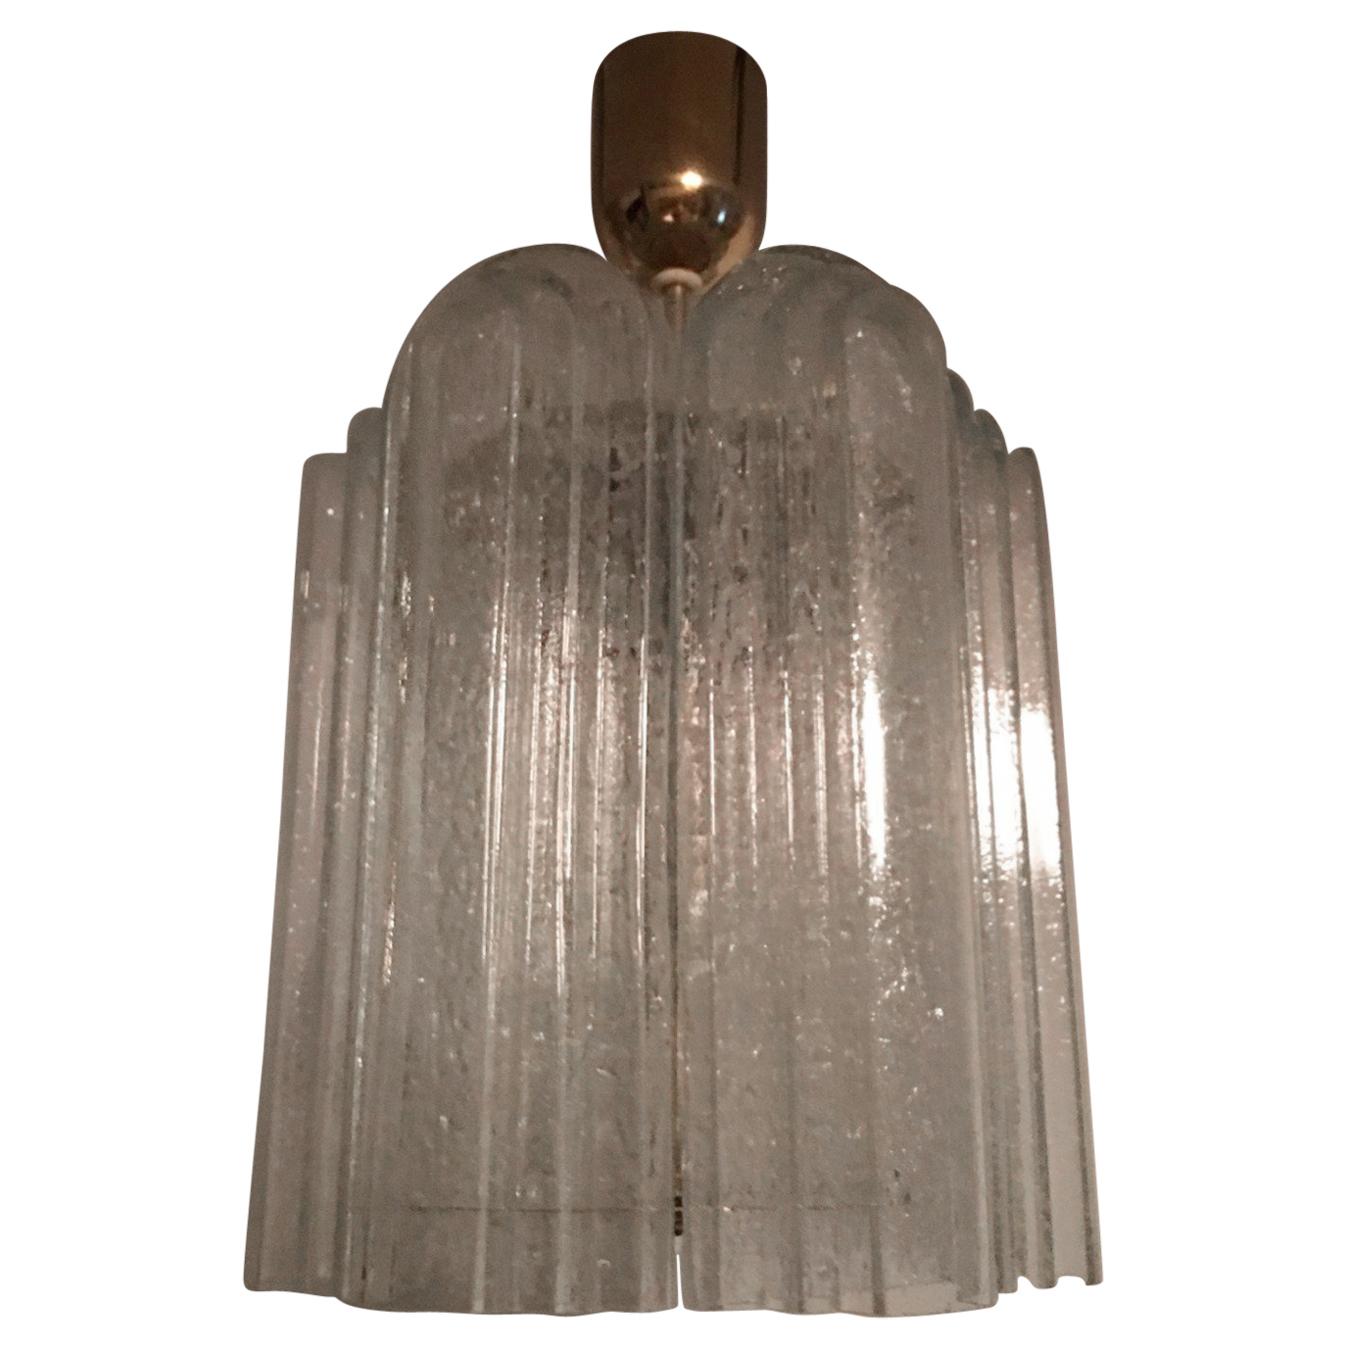 Stepped Glass Doria Pendant Chandelier from Germany For Sale